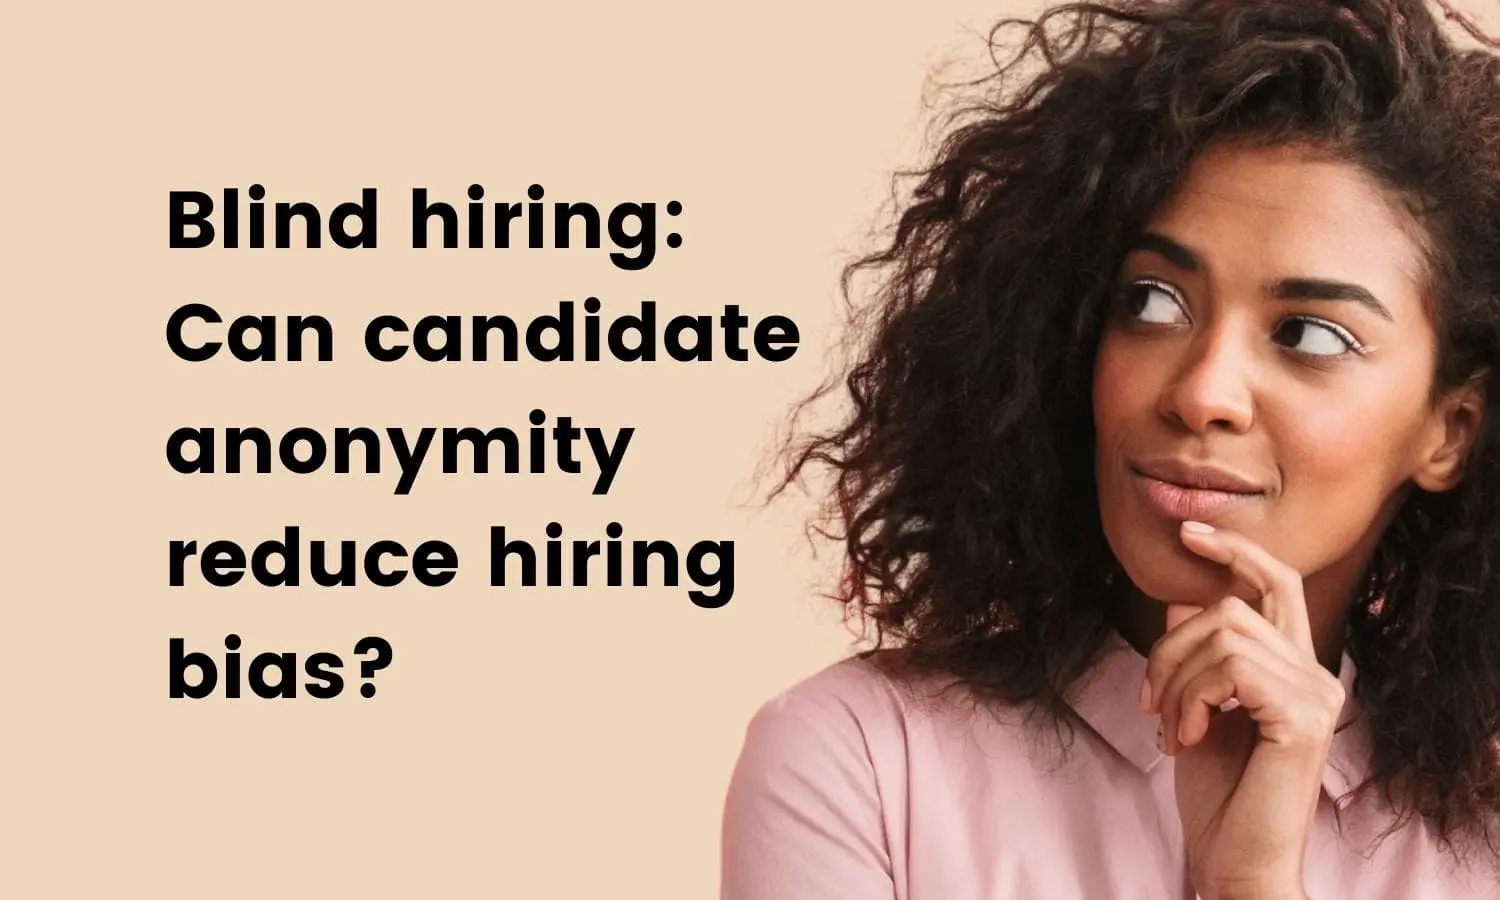 Blind hiring: Can candidate anonymity reduce hiring bias?